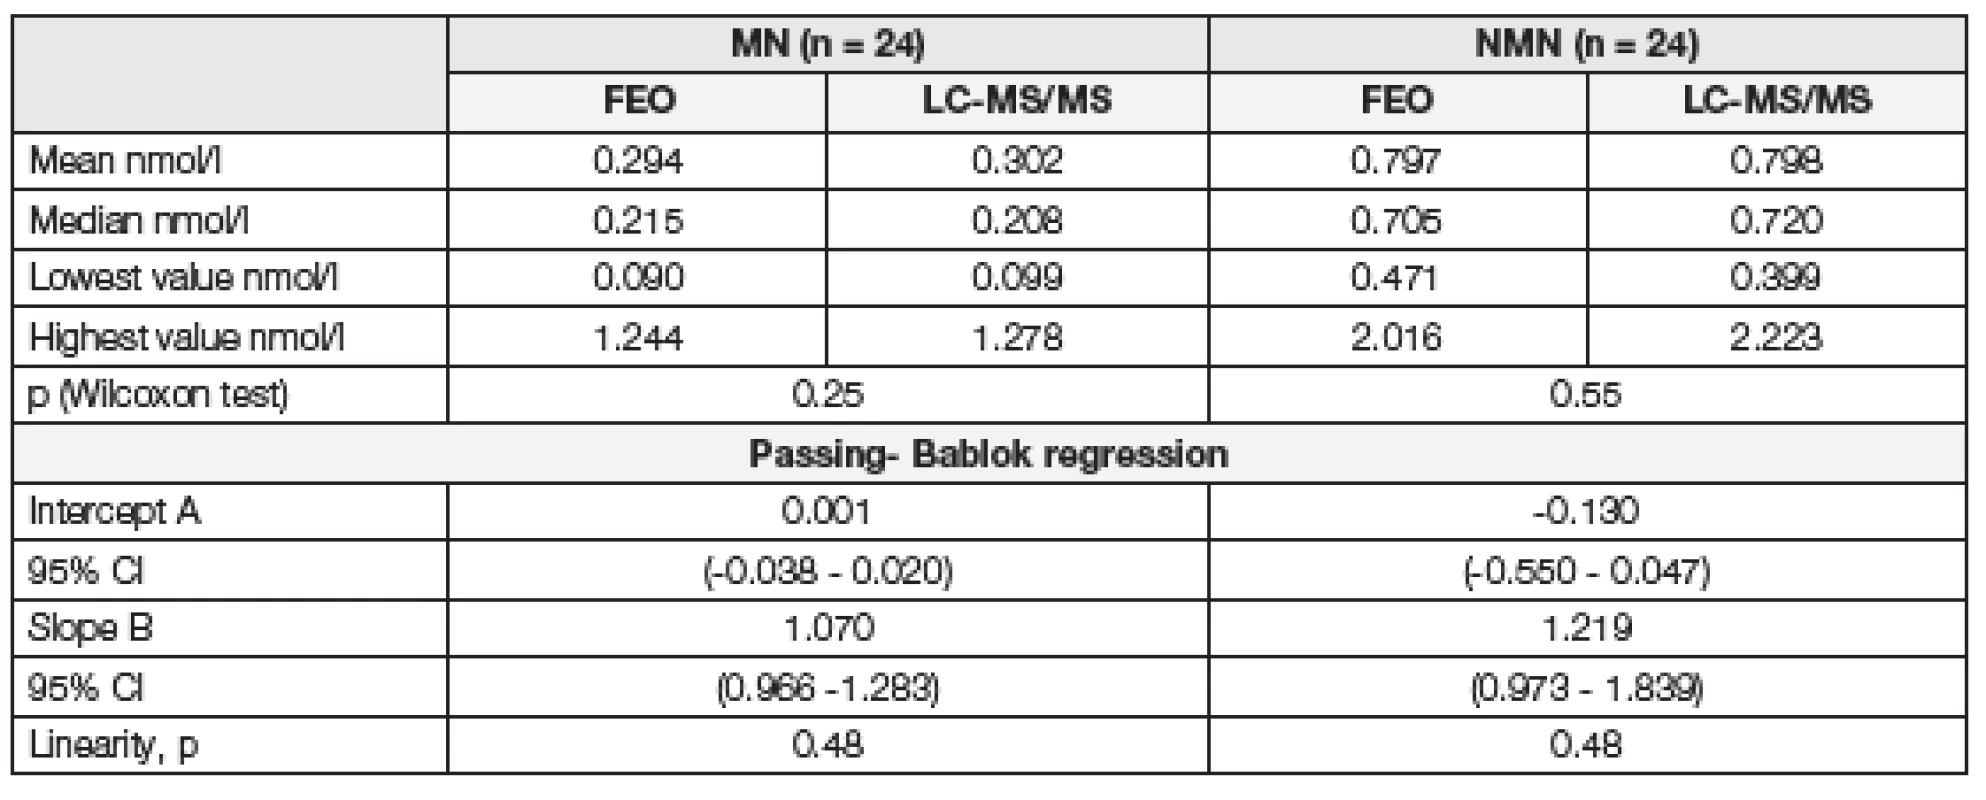 The parameters of statistical analysis for FEO and LC-MS/MS methods